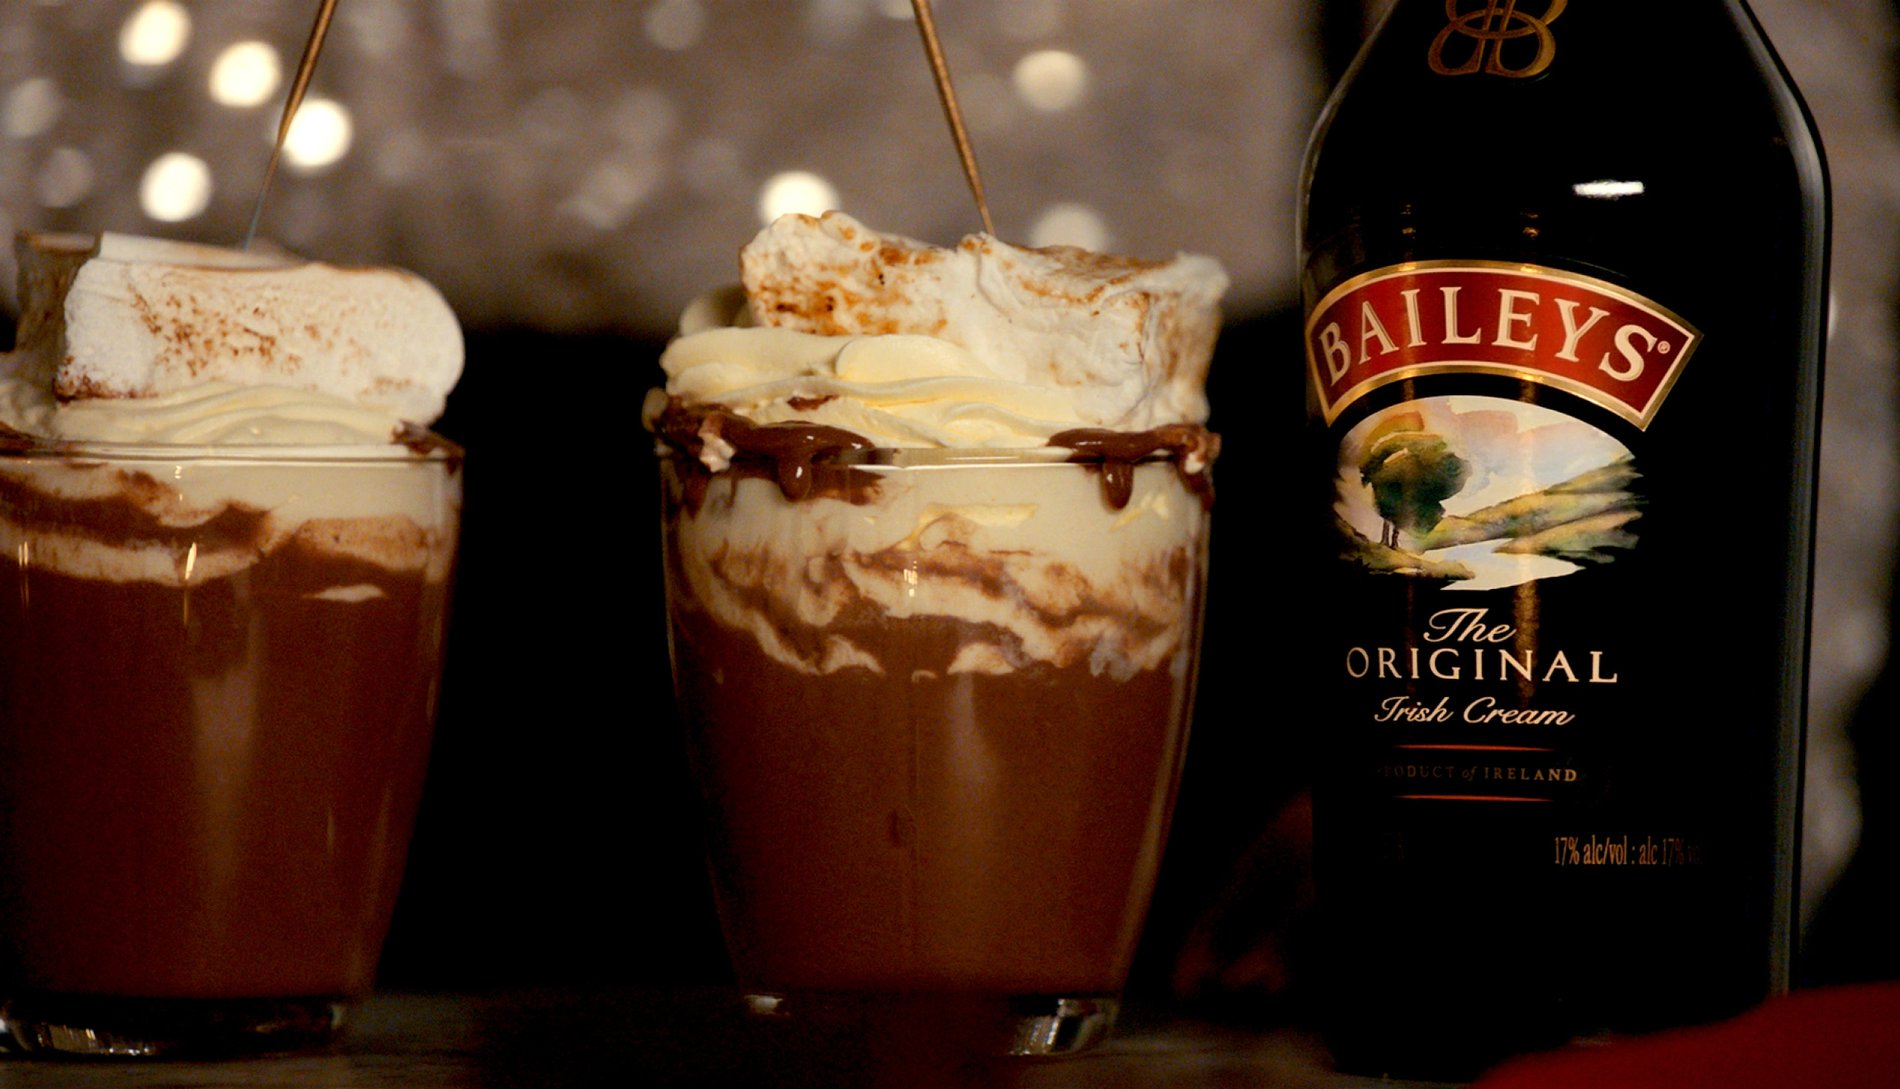 Two glasses with hot chocolate and a bottle of Baileys Original Irish Cream